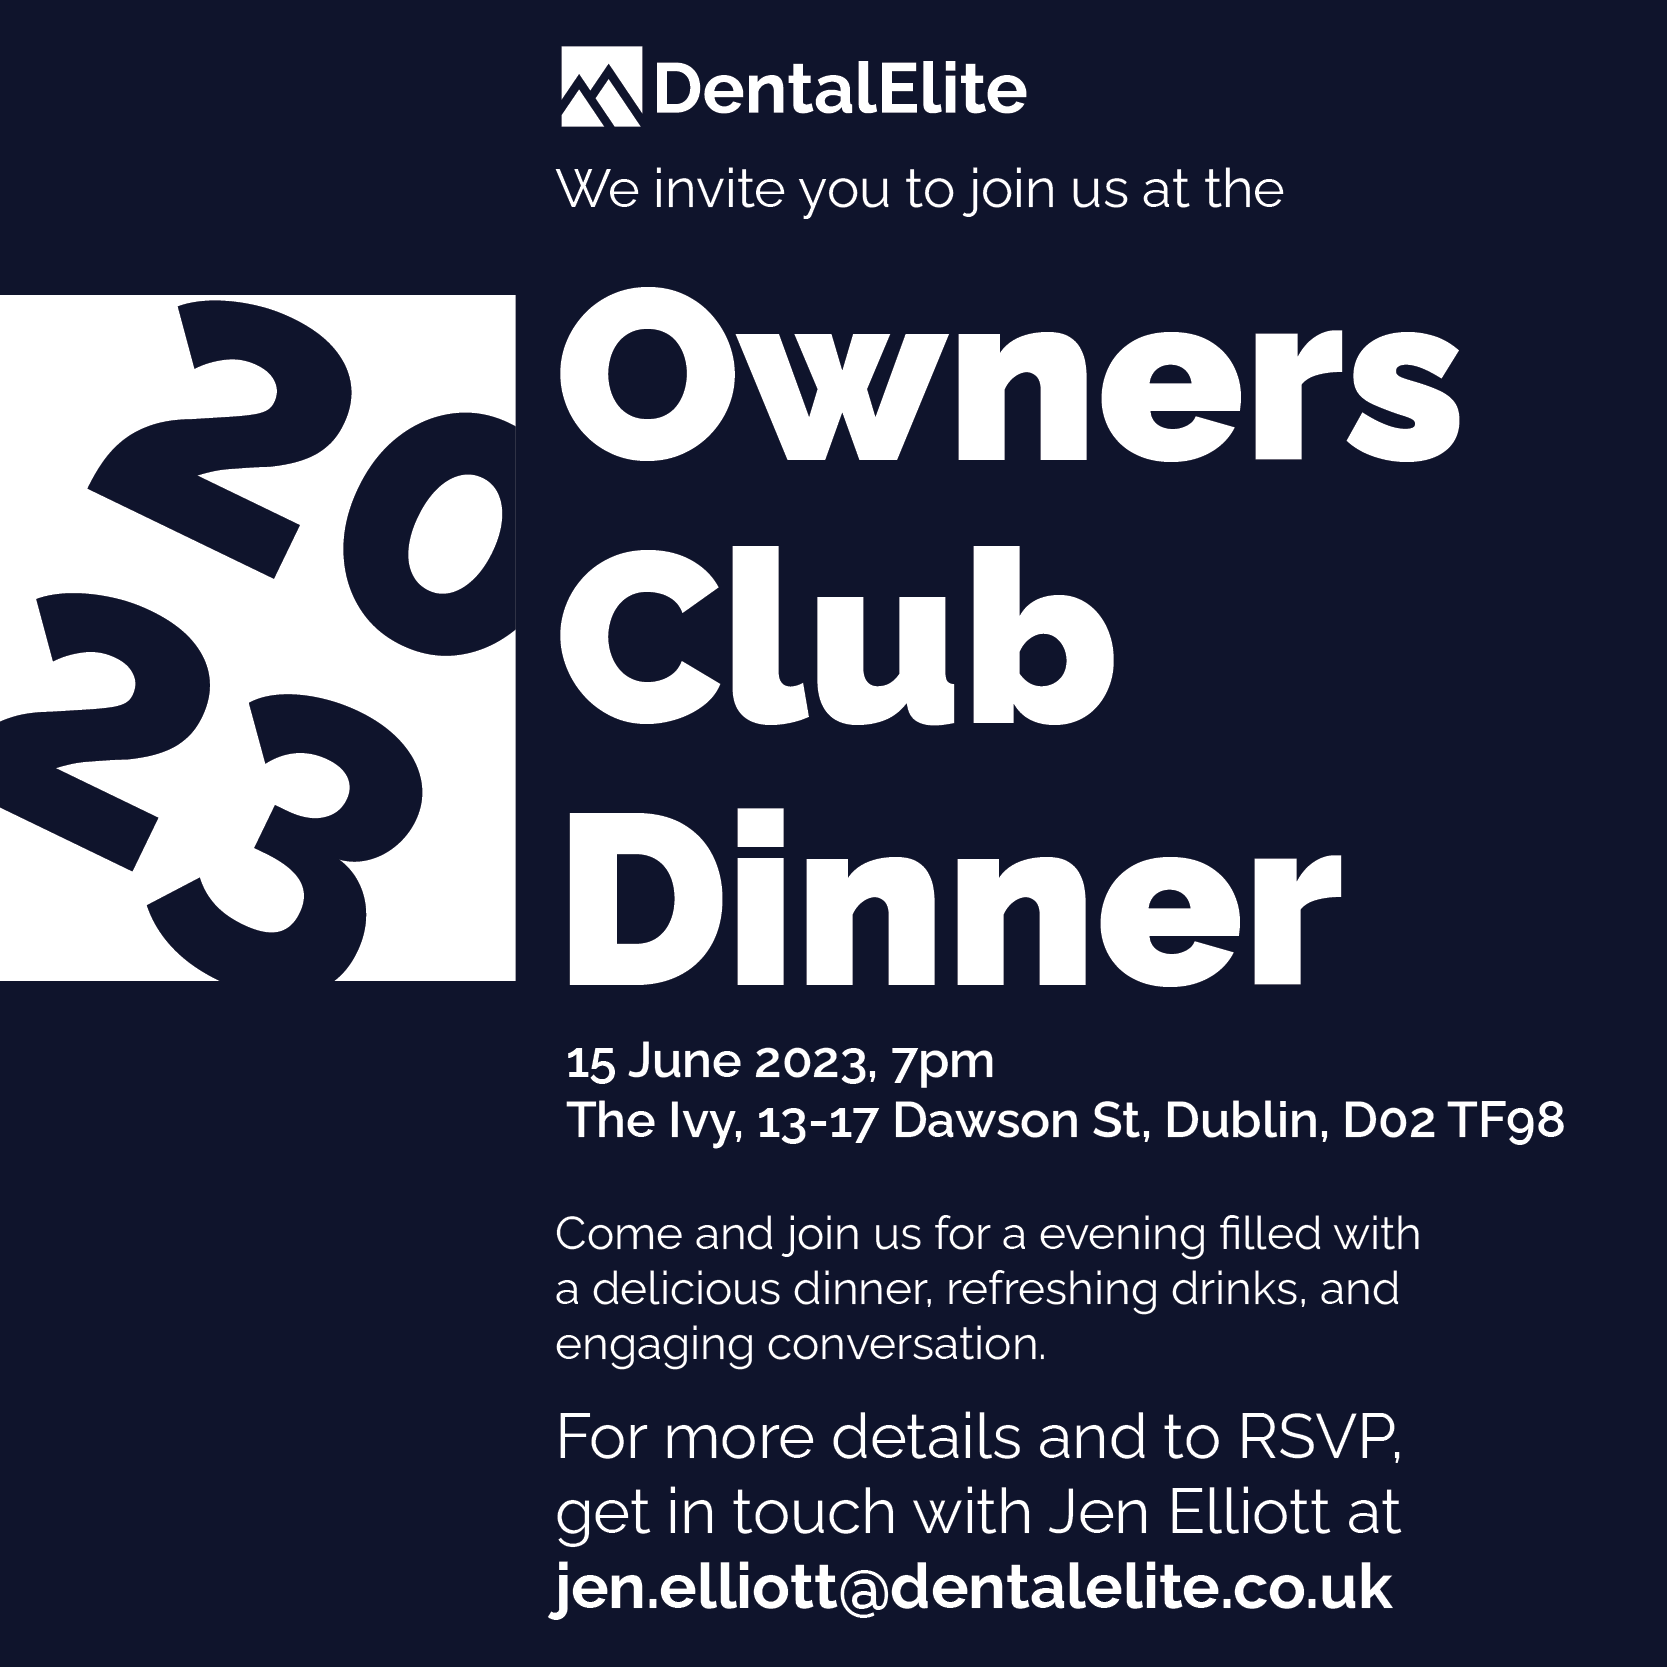 AD: We invite you to join us at the 2023 Owners Club Dinner. 15 June 2023, 7pm at The Ivy, Dawson St, Dublin